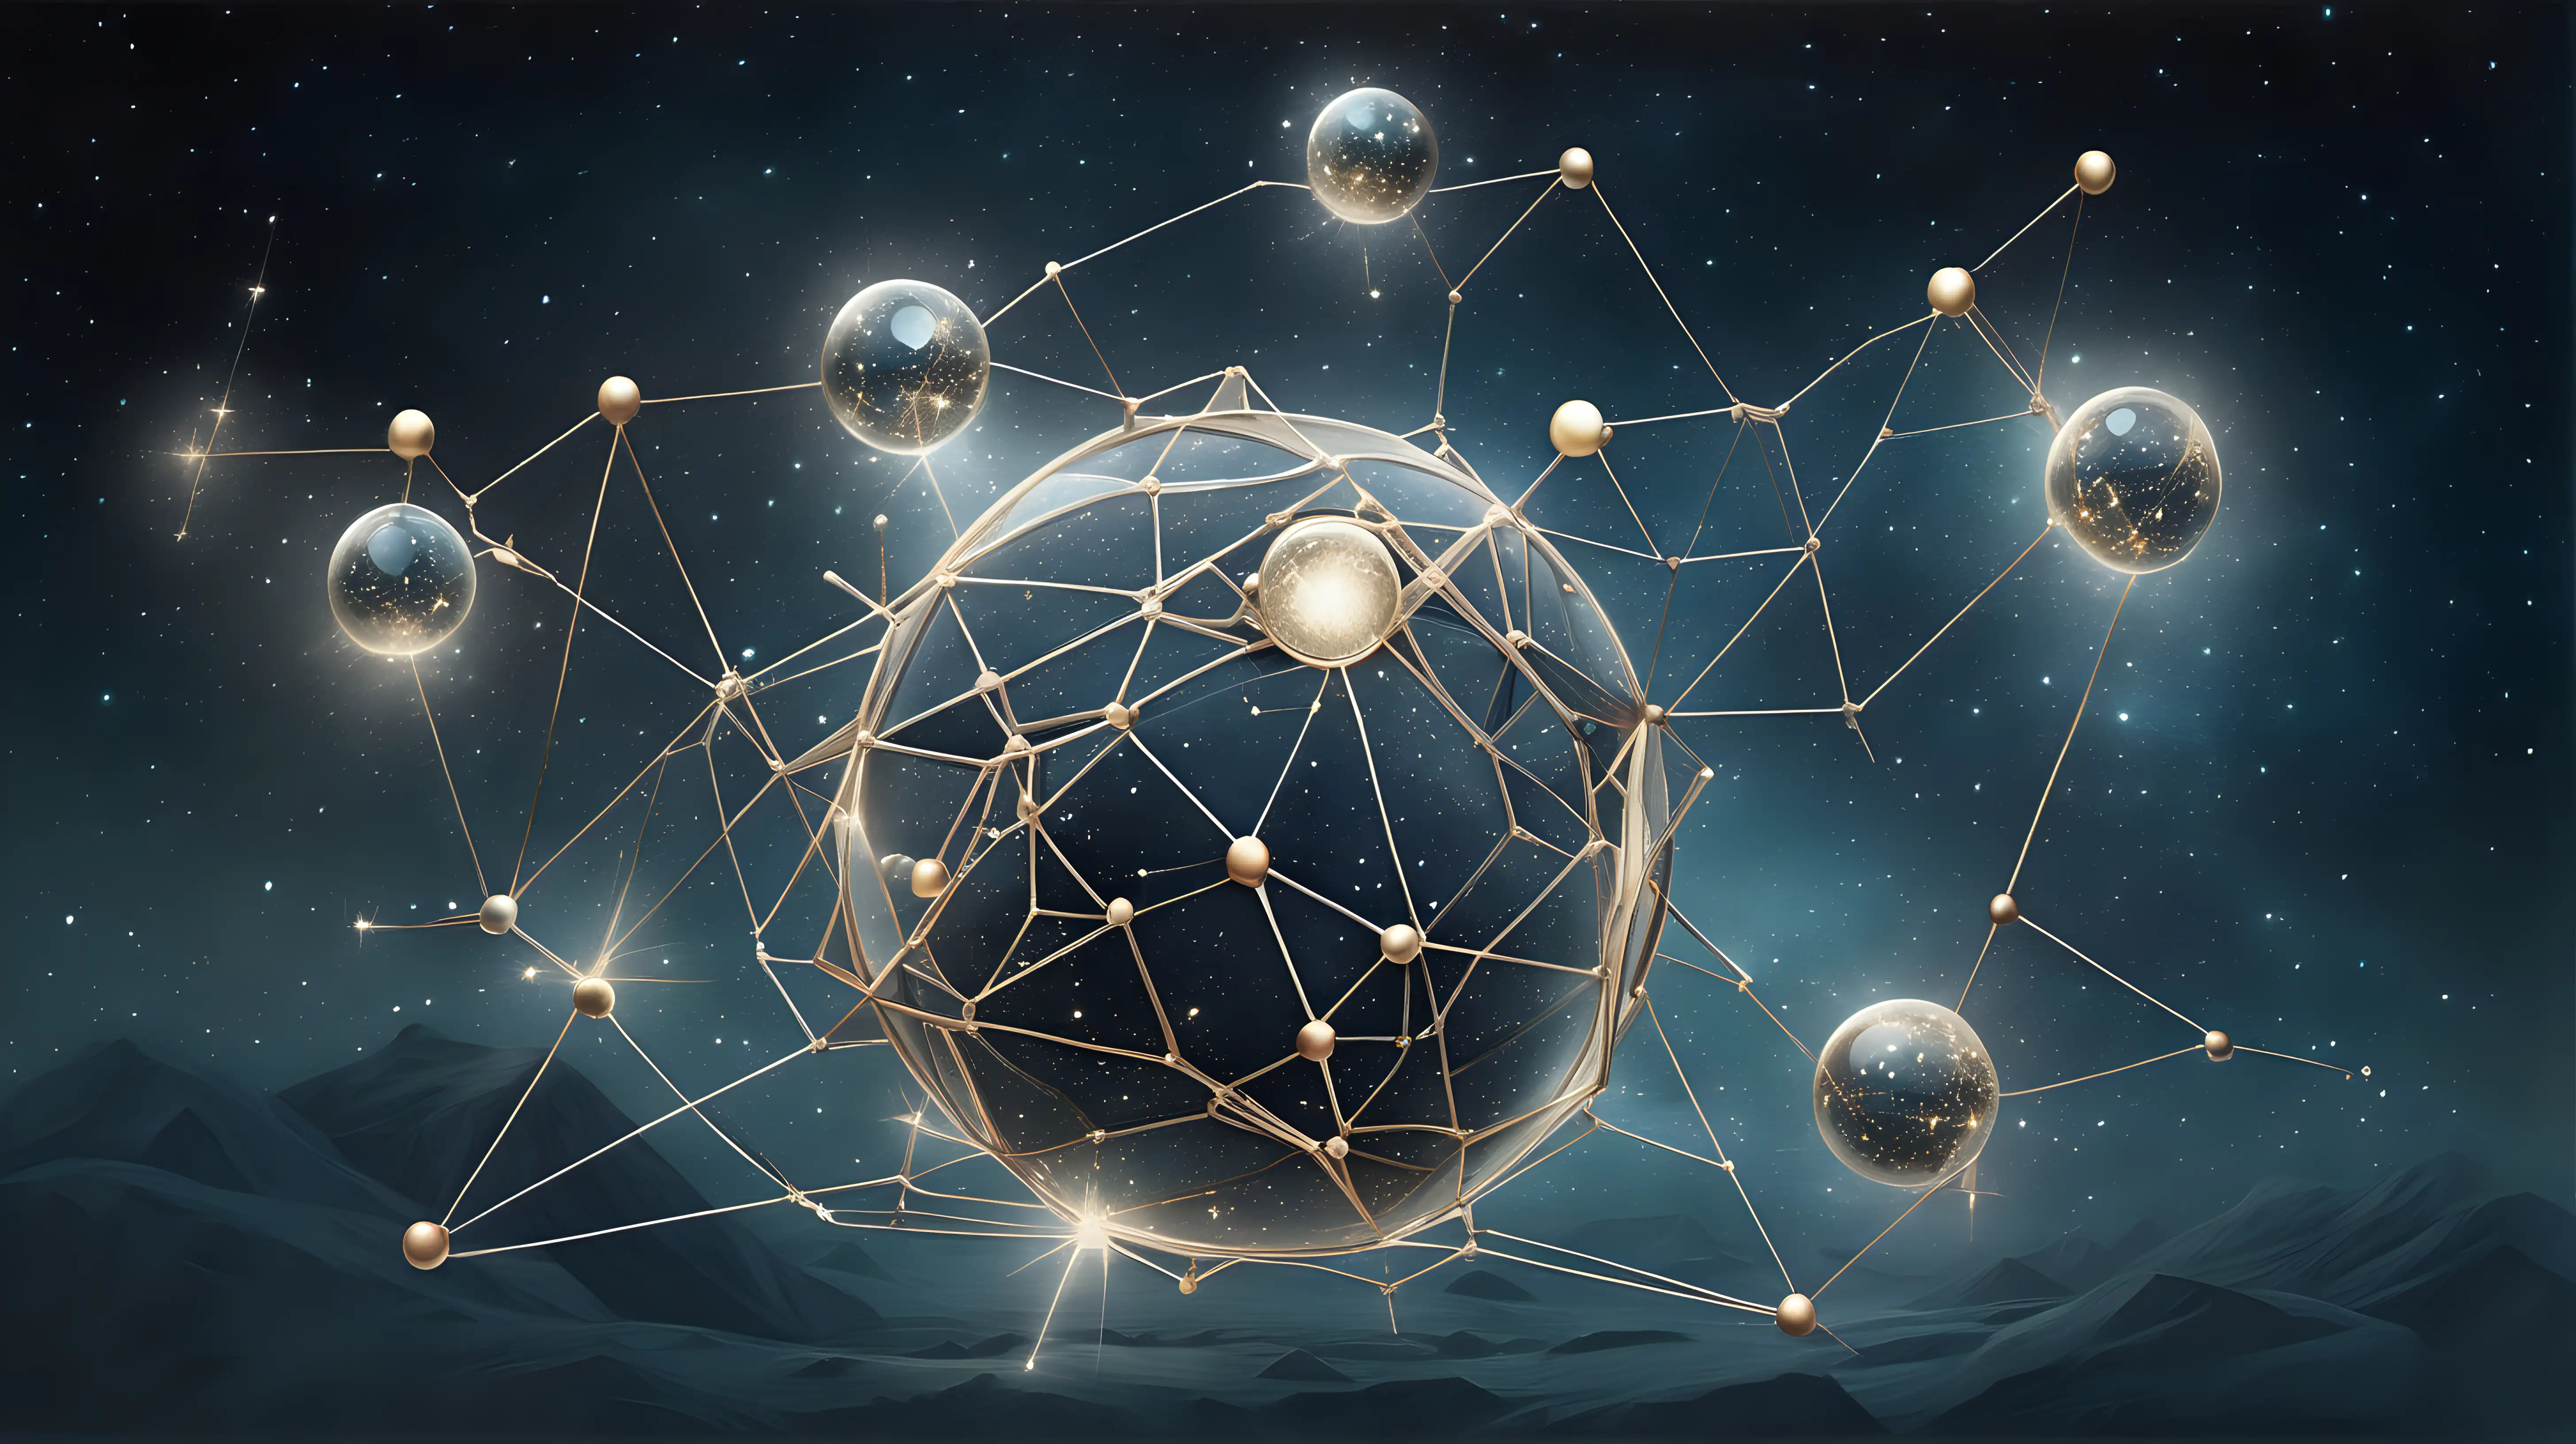 Celestial Spheres Arranged in Abstract Constellation Art